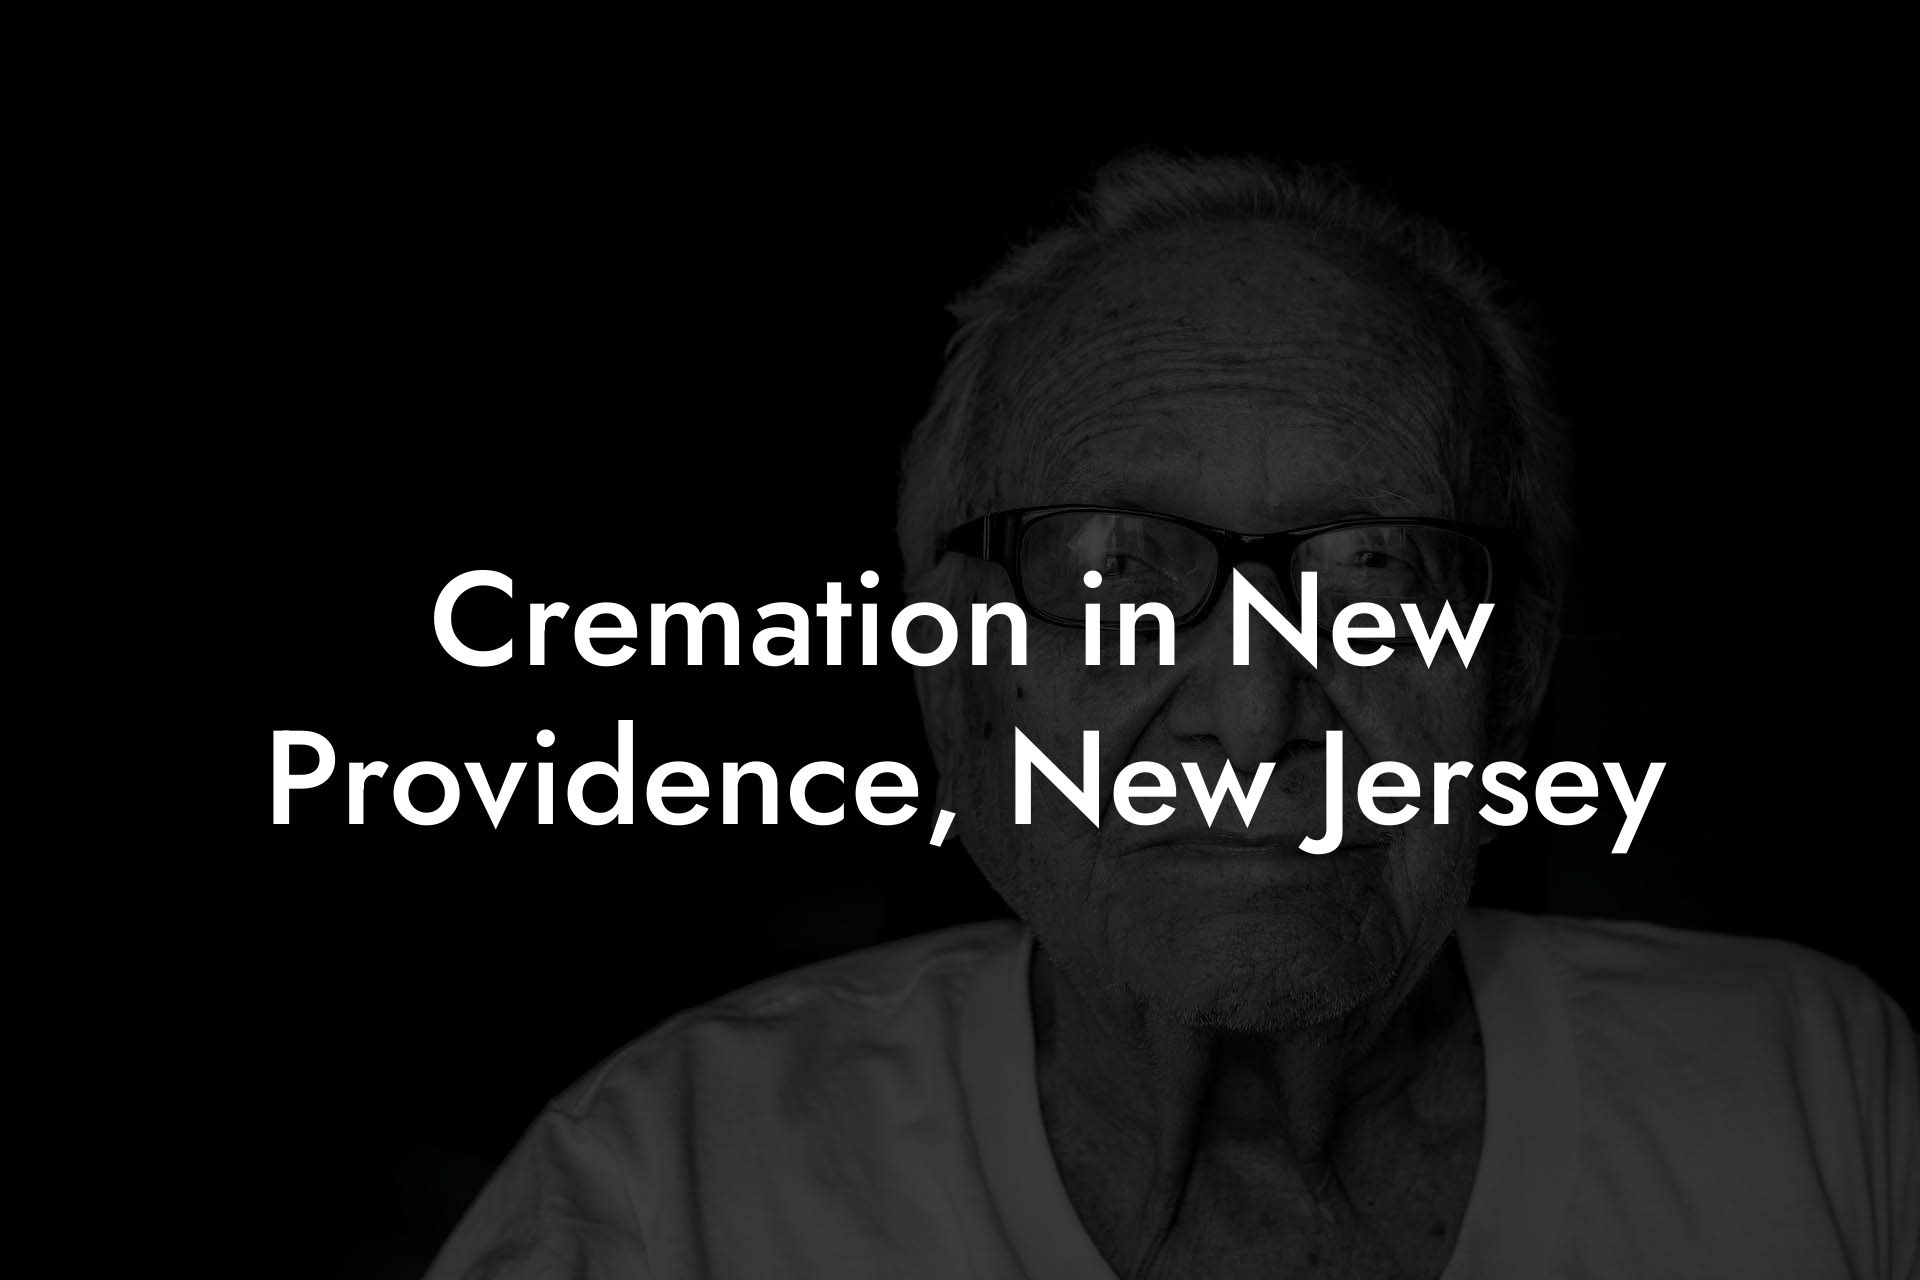 Cremation in New Providence, New Jersey